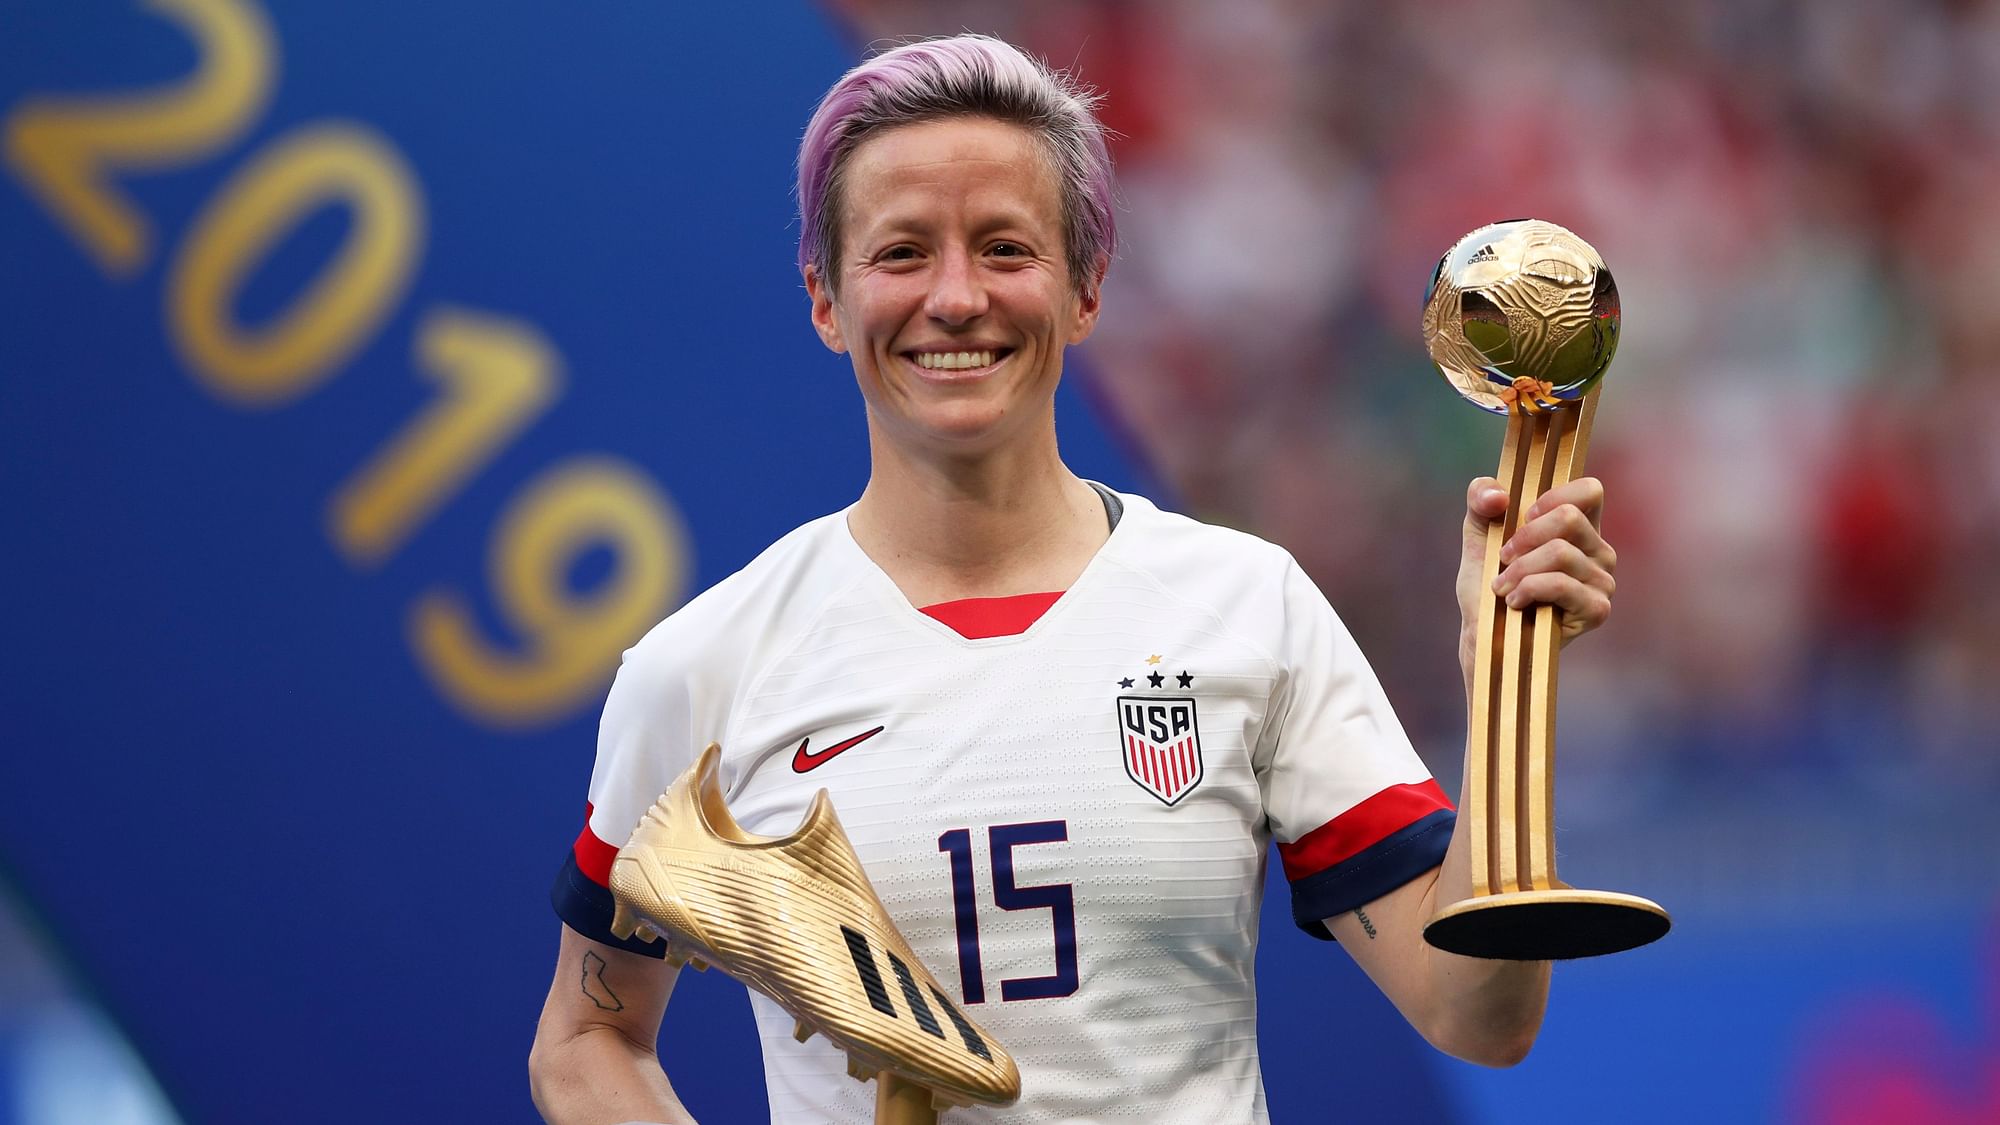  United States’ Megan Rapinoe poses with her individual awards at the end of the Women’s World Cup final last year.